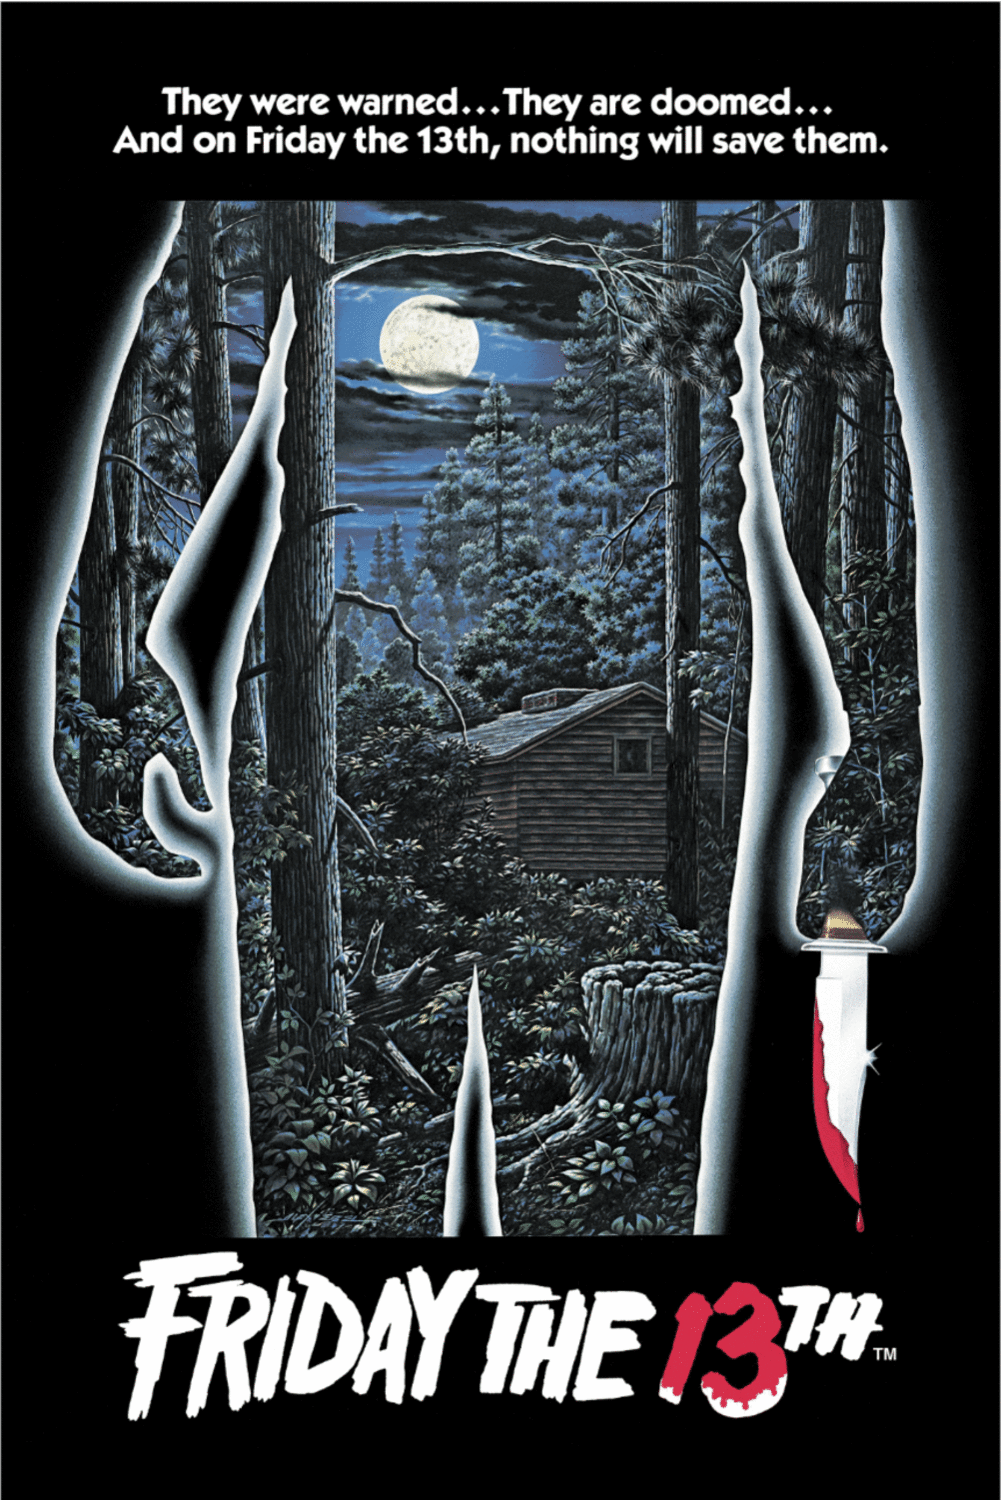 Spiros Angelikas "Friday the 13th" Glow-in-the-Dark Edition